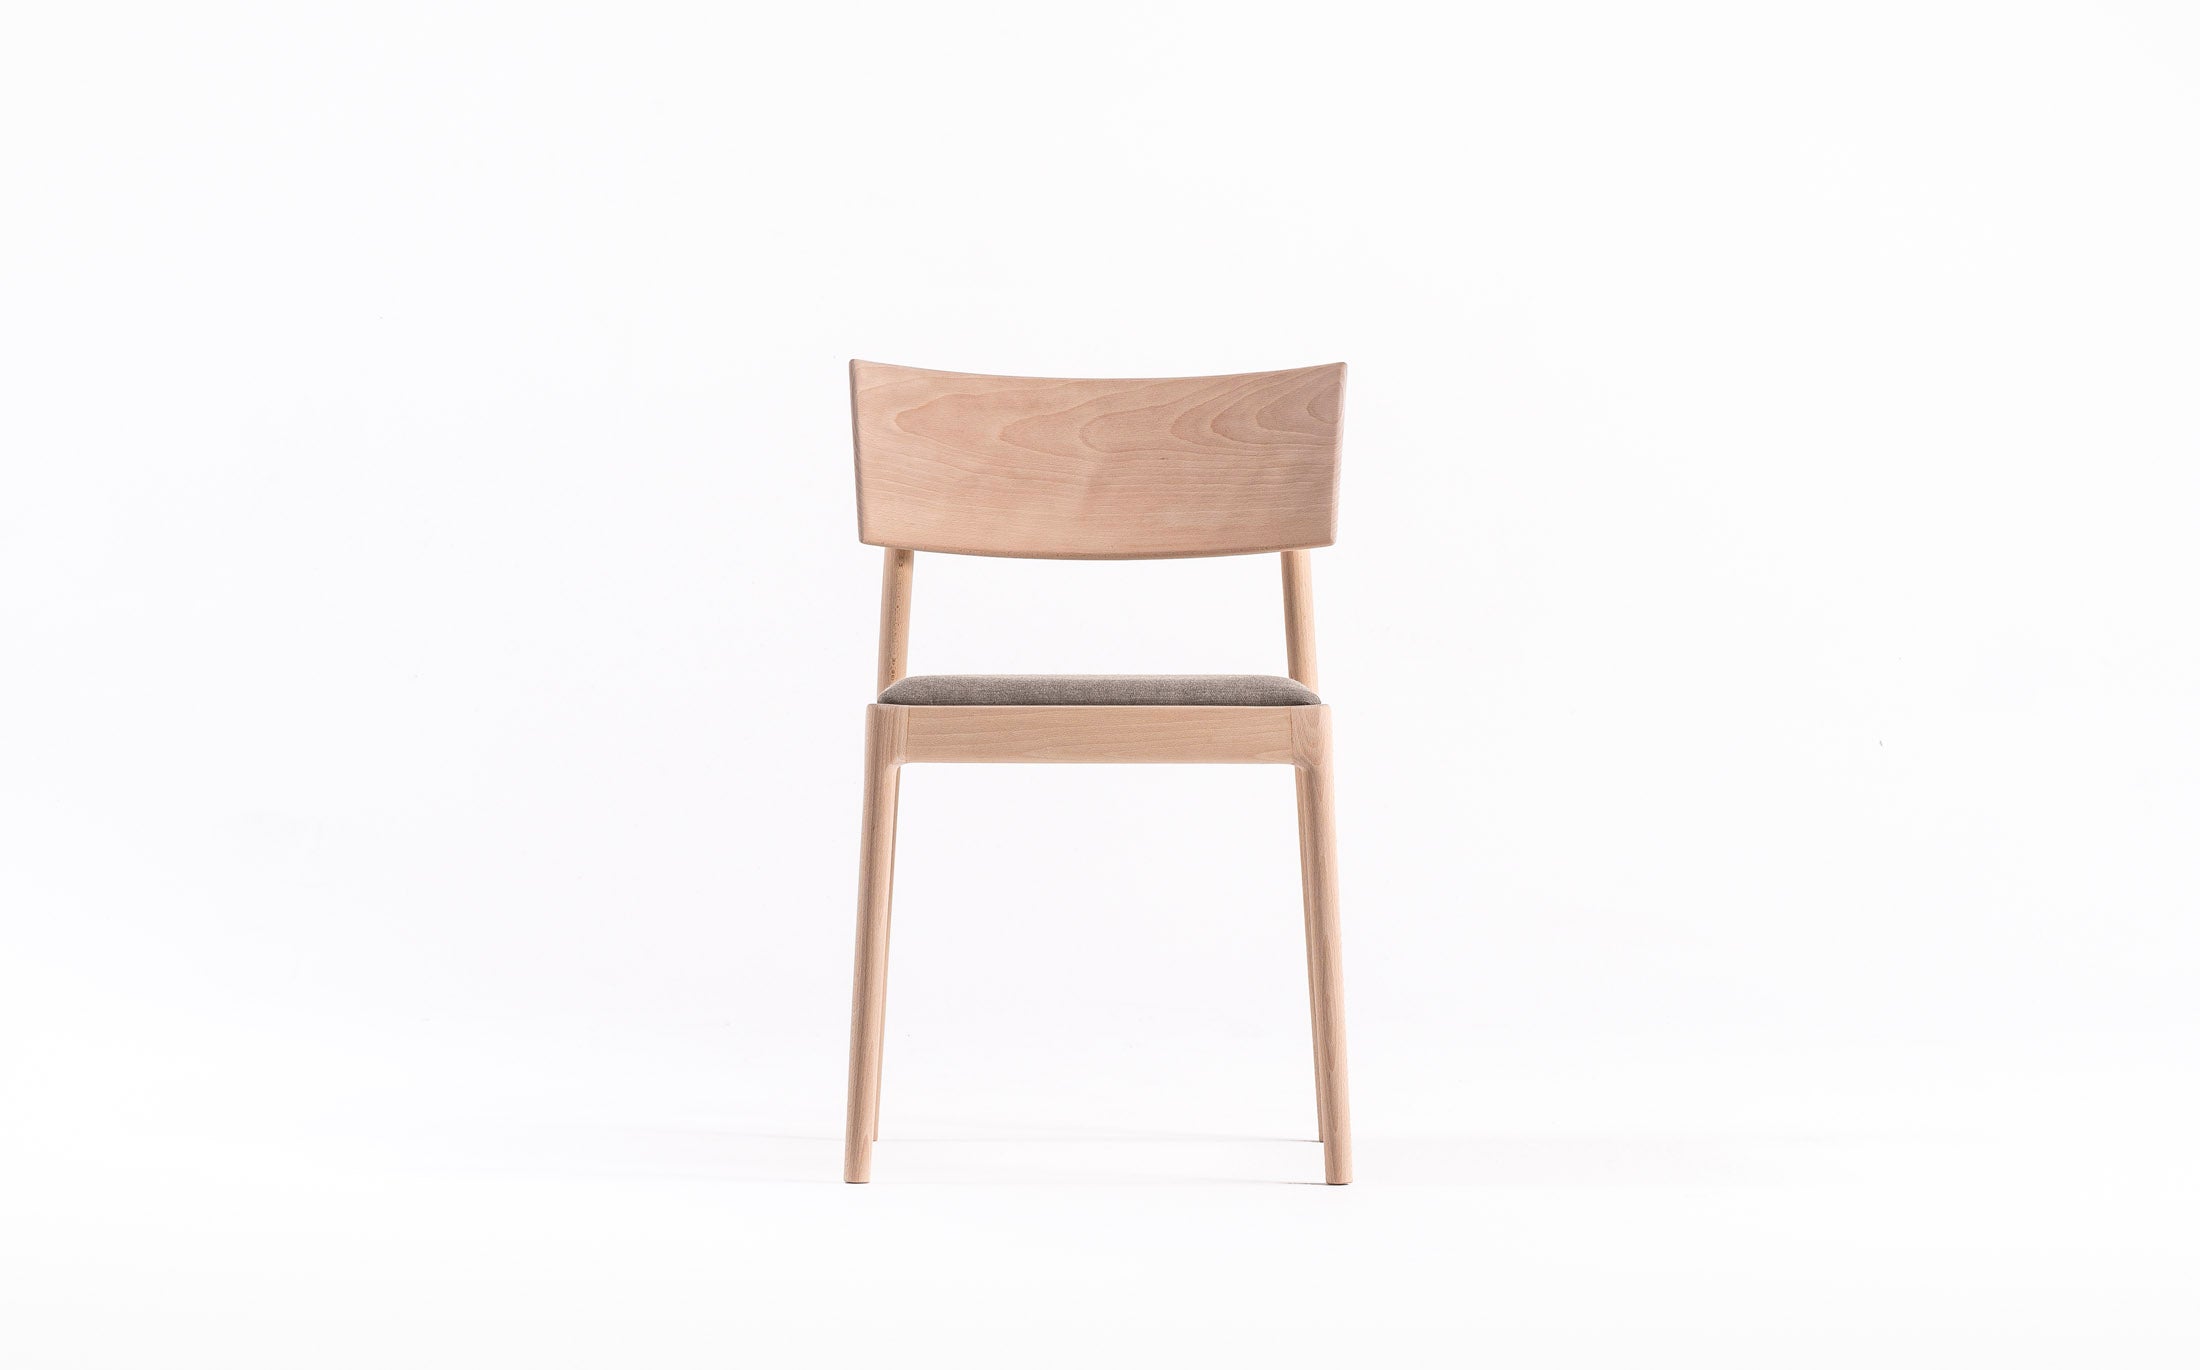 The stacking light chair #Seat materials_fabric1 riff 13/08